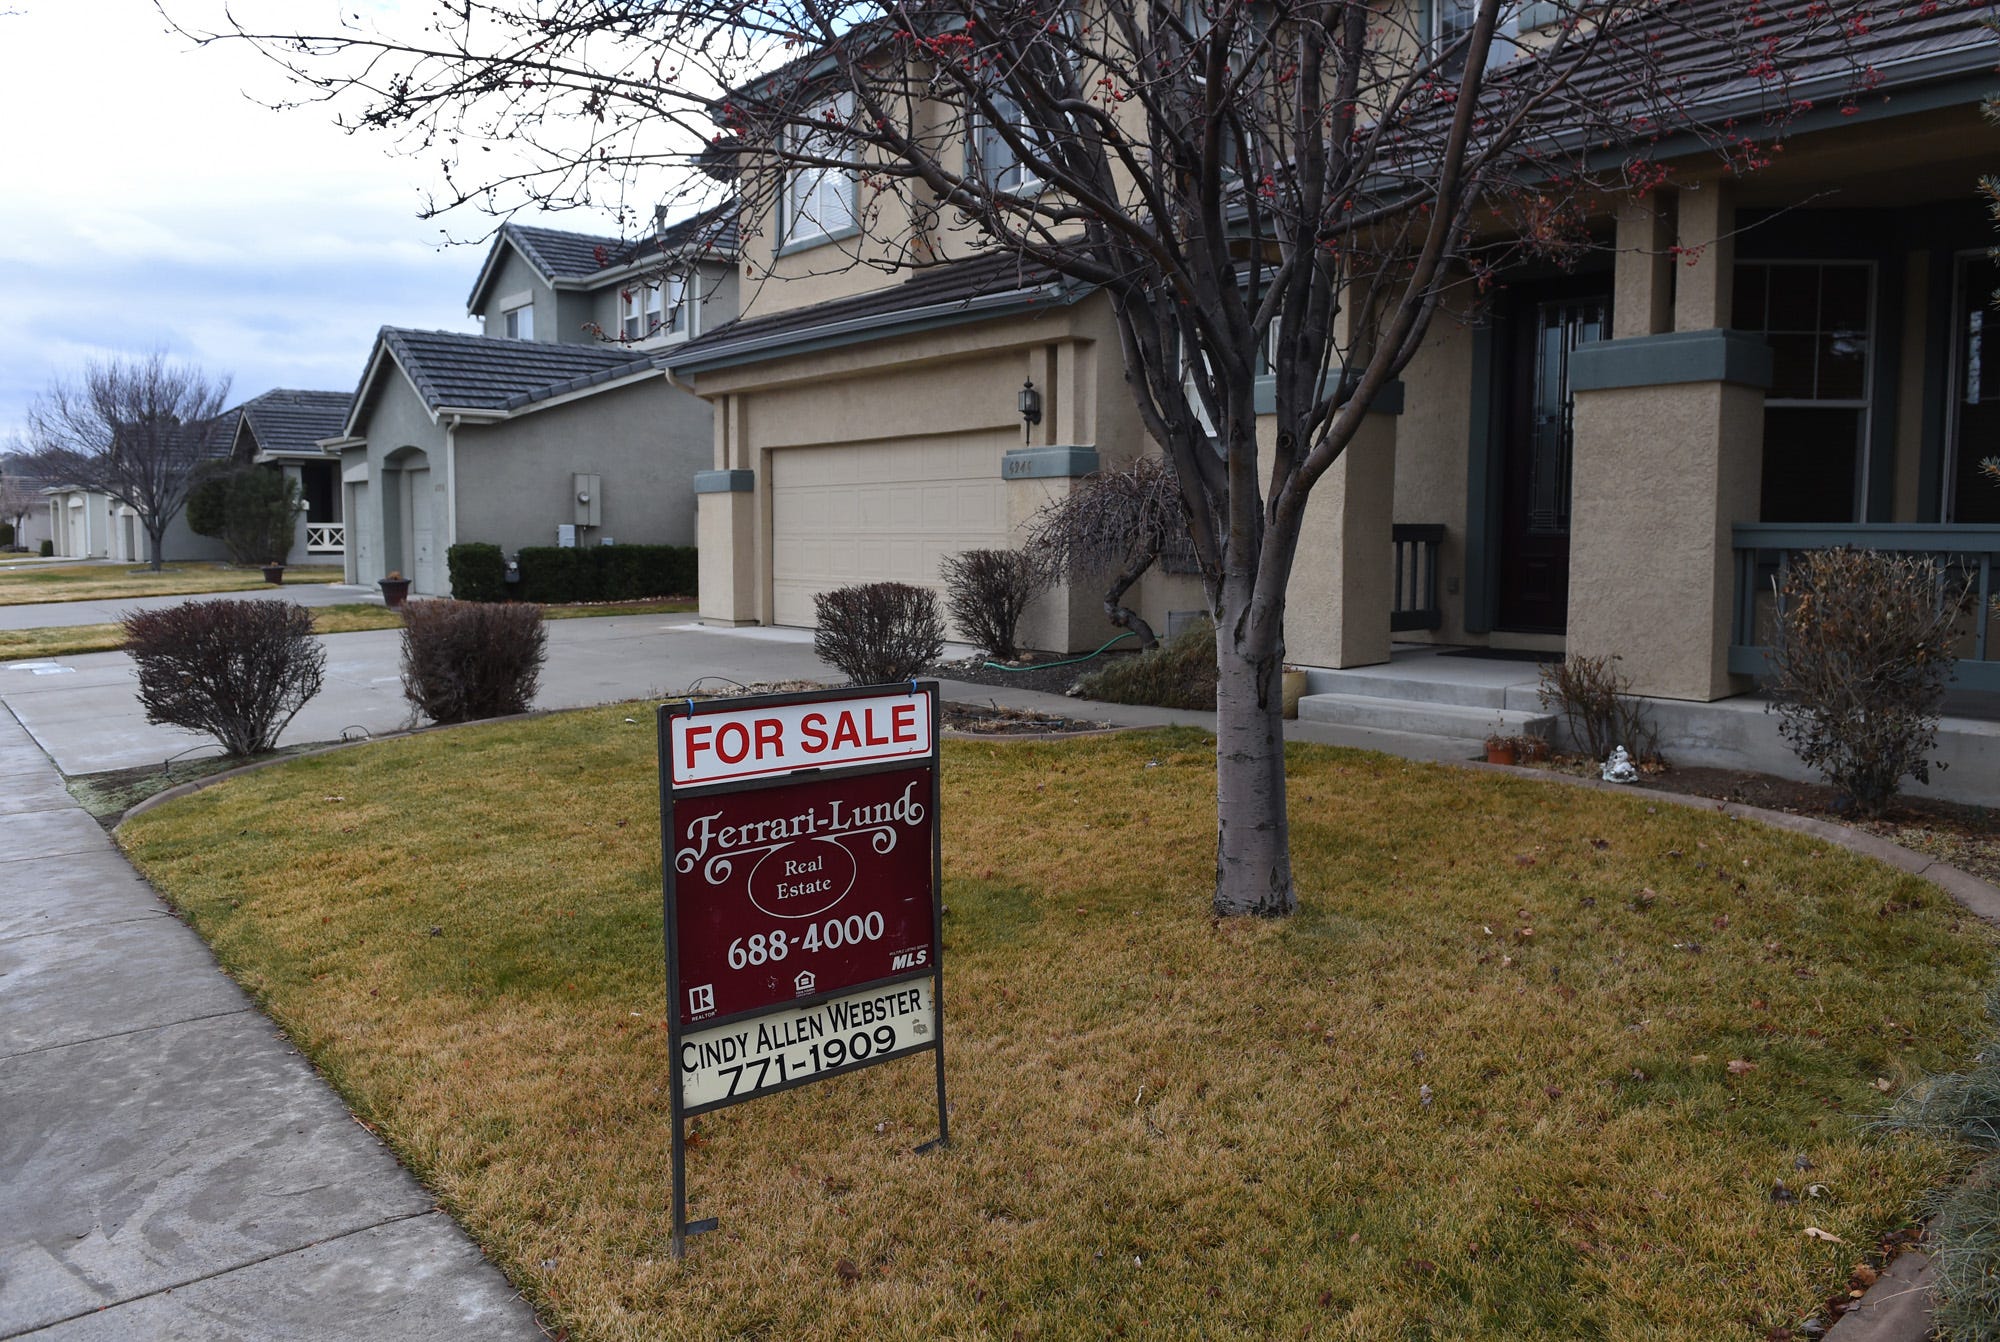 Reno-Sparks house prices set new record high for fourth time this year